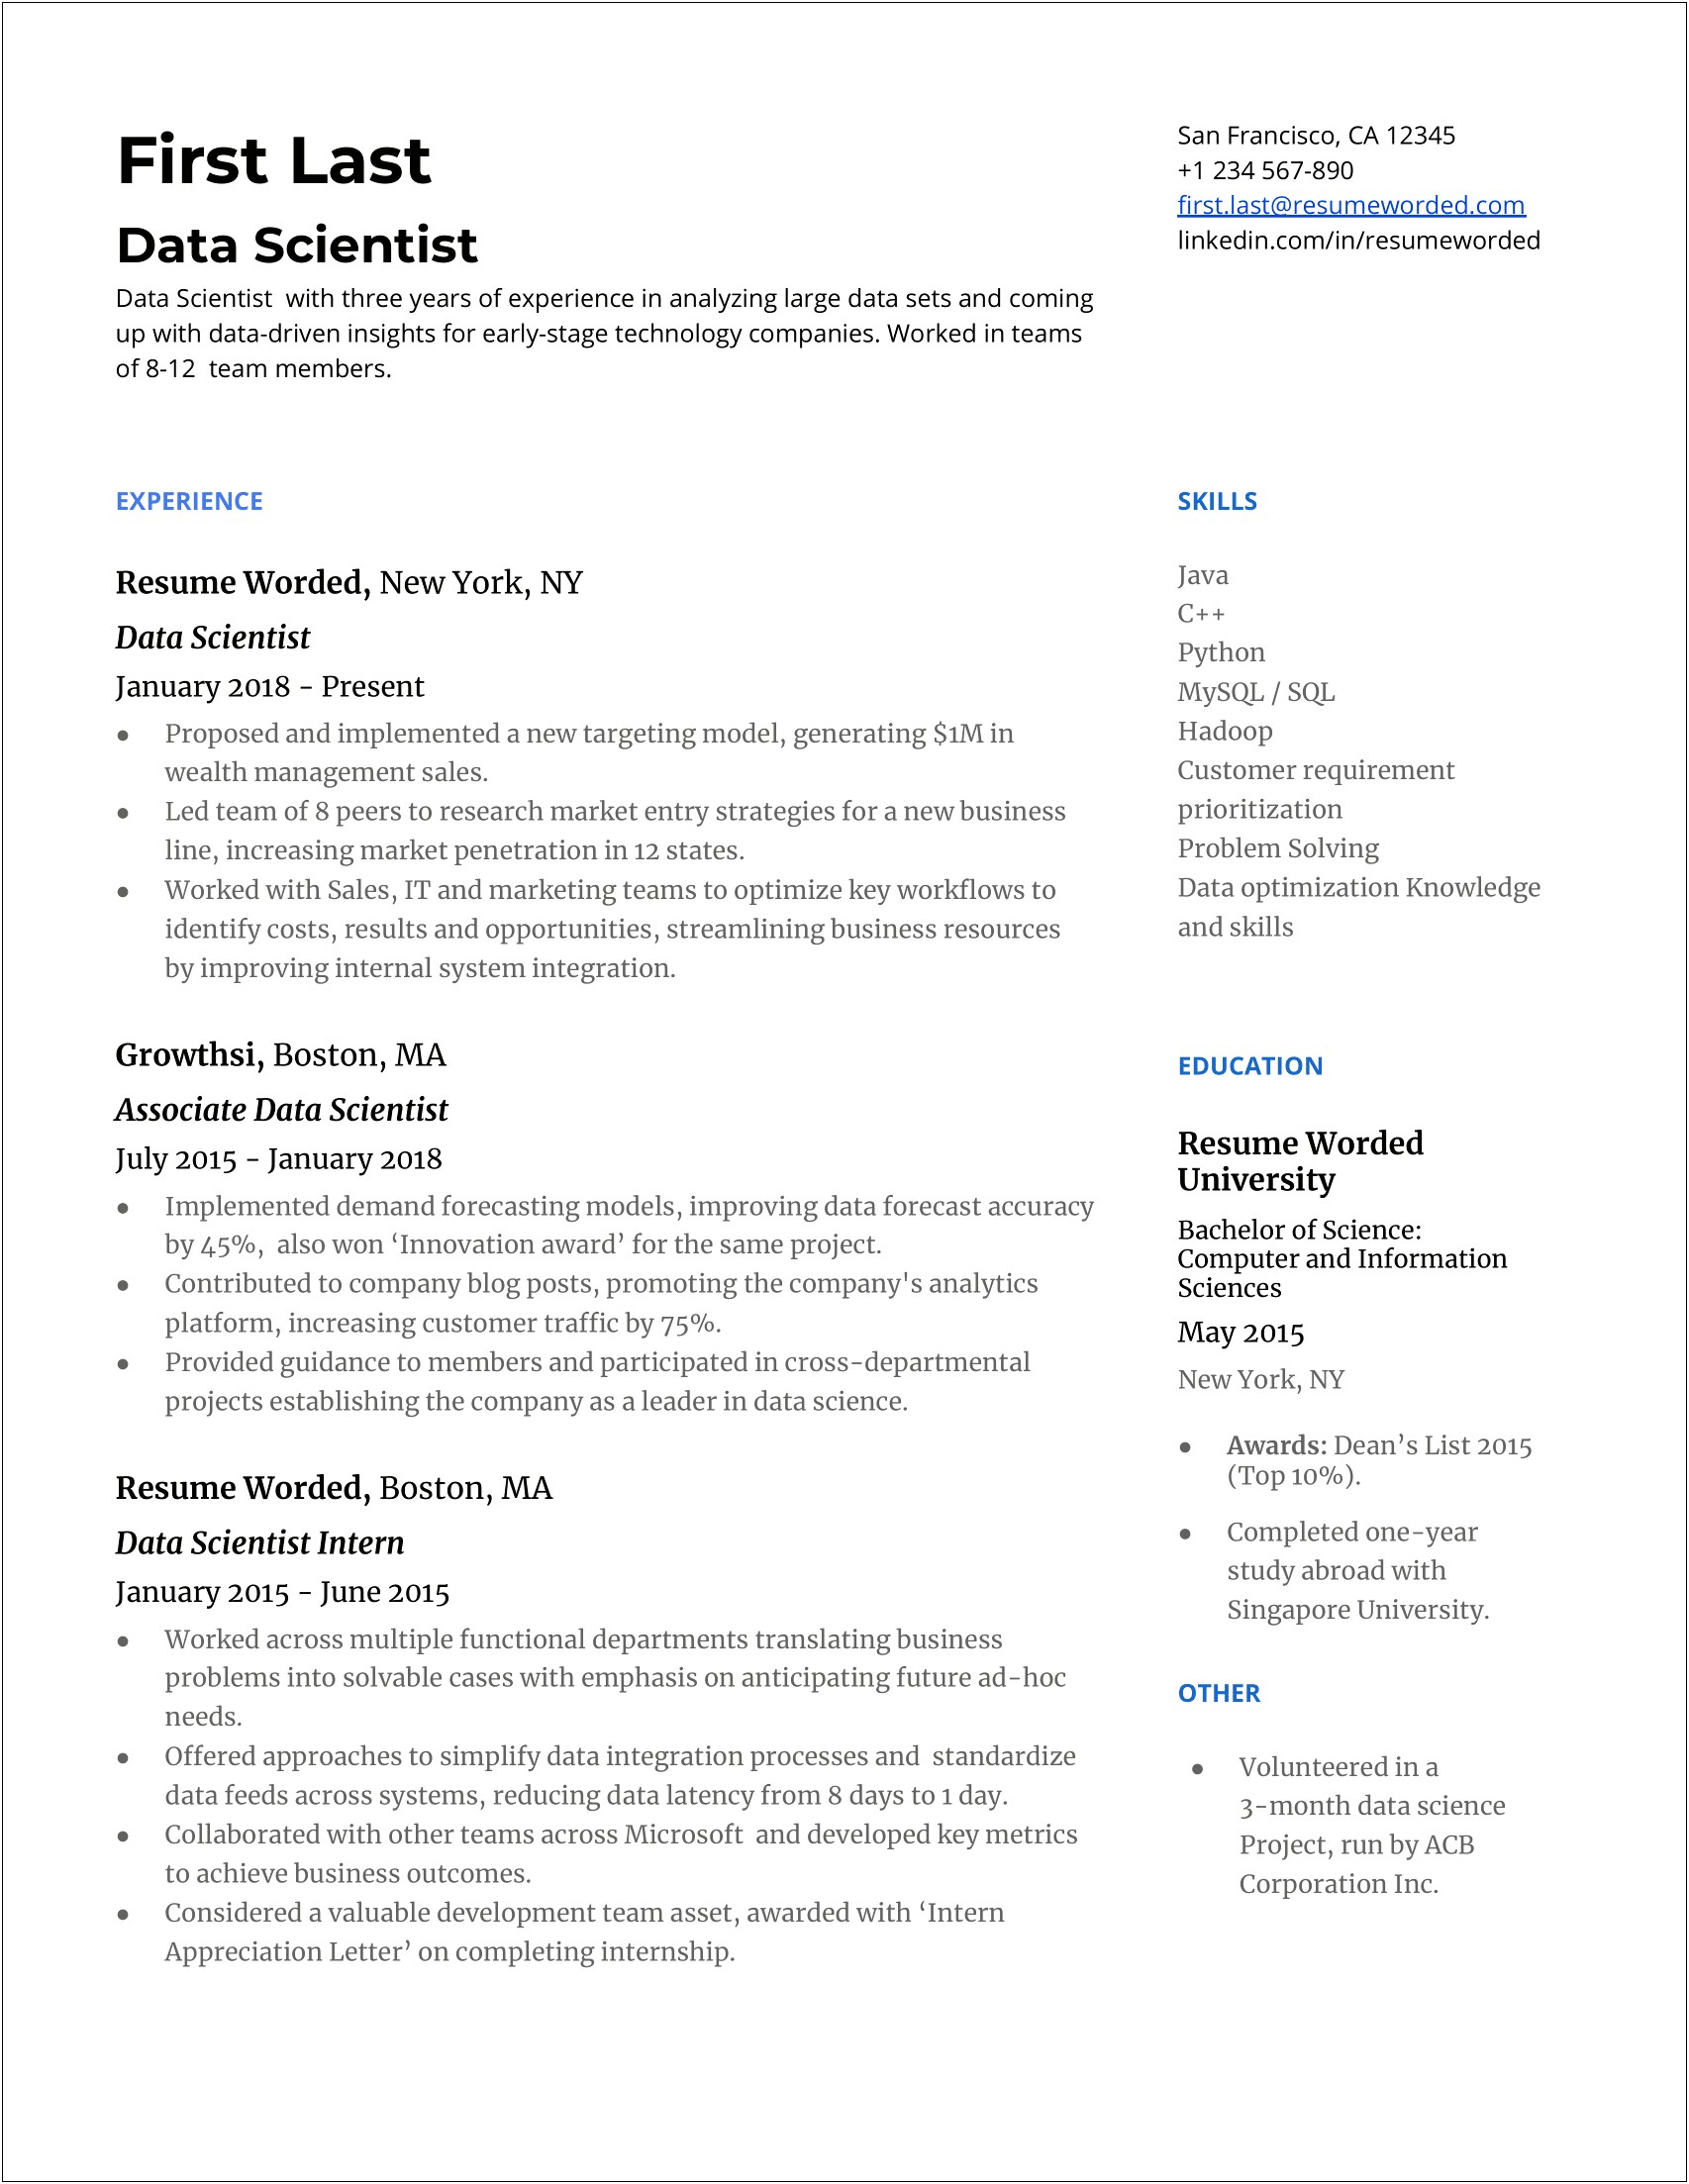 Data Science Skills Section Resume